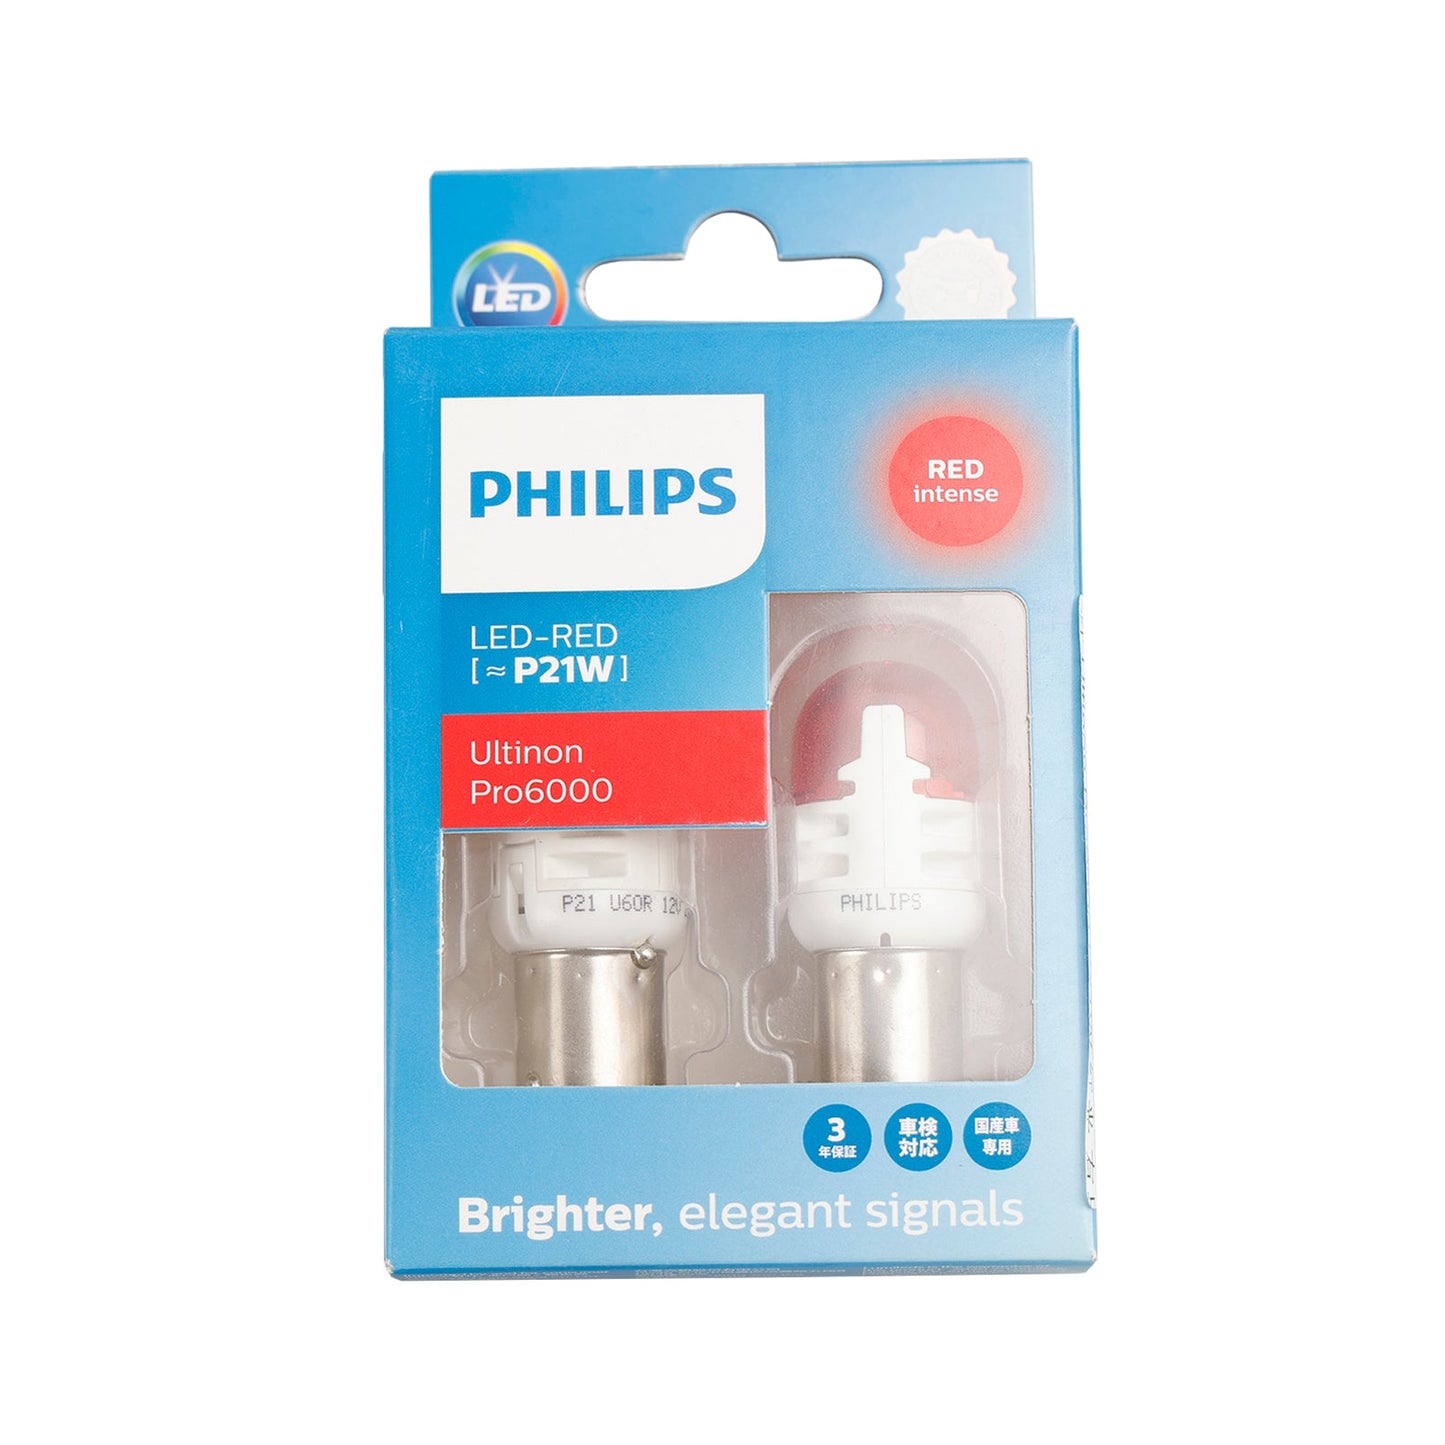 Für Philips 11498RU60X2 Ultinon Pro6000 LED-ROT P21W intensives Rot 75lm